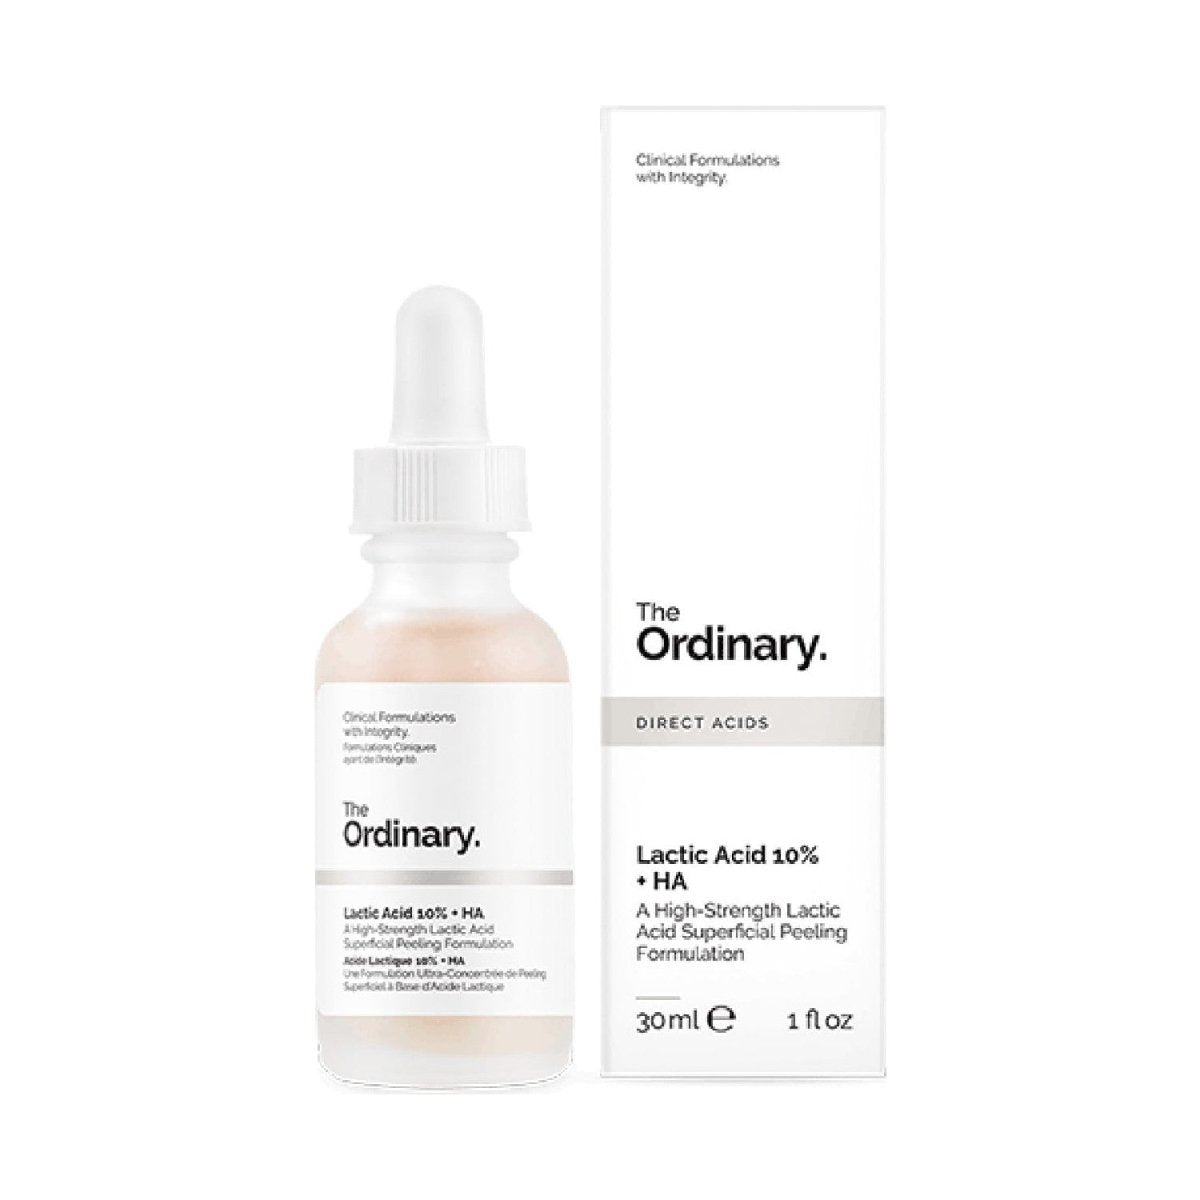 the ordinary Lactic Acid 10% + HA face serum by eclat body lab in lebanon